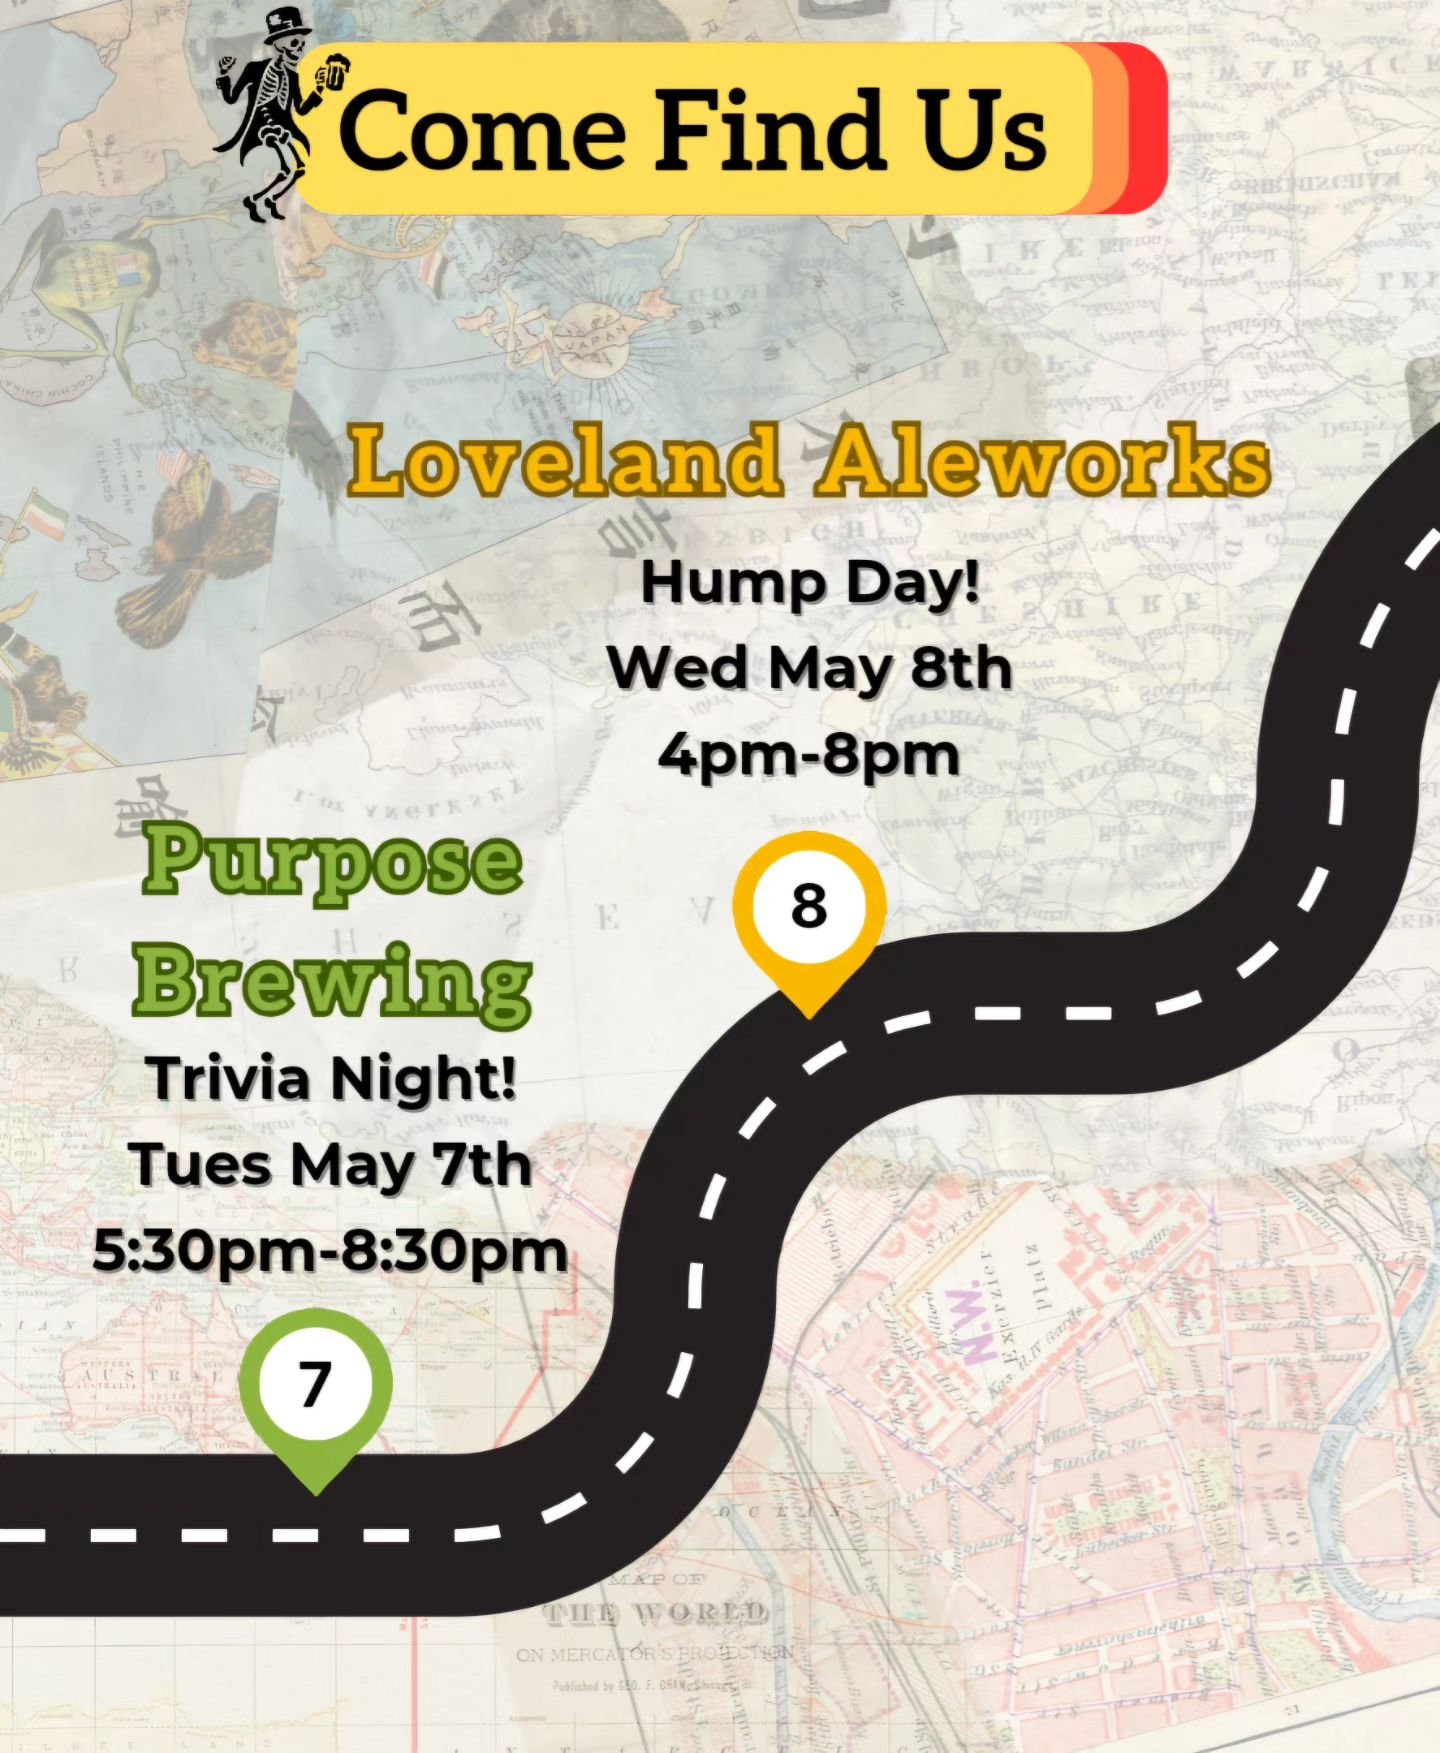 We got a slower week coming up, so come get some grub while you can!

Purpose Brewing: Tuesday, May 7th. 5:30pm-8:30pm.
Loveland Brewing: Wednesday, May 8th. 4pm-8pm.